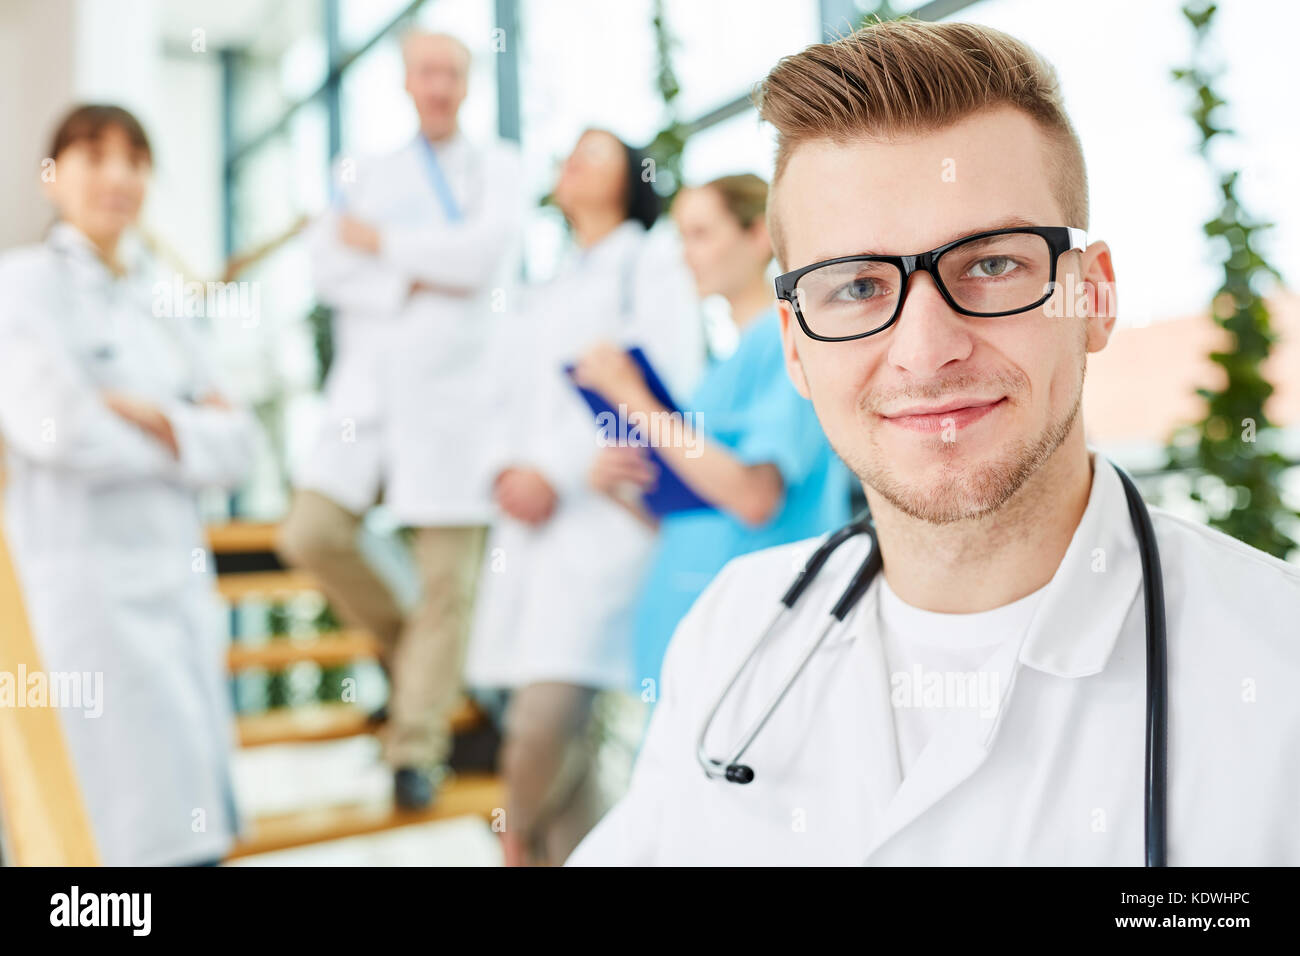 Young physician in medicine apprenticeship with team of doctors Stock Photo